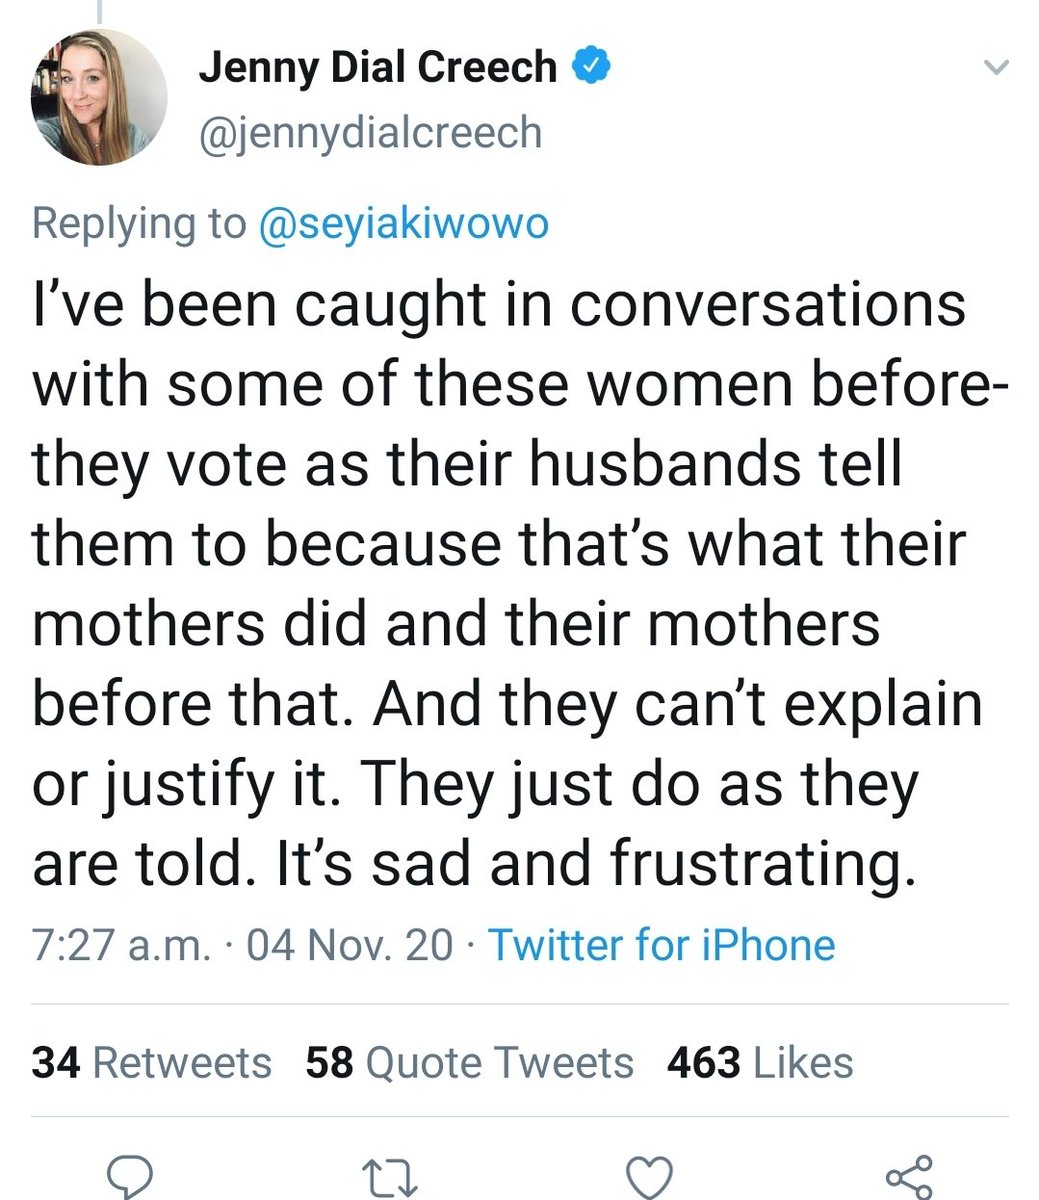 9/They'll say women who voted for Trump can't think for themselves and are puppets controlled by their husbands.They'll do this to ignore what those women actually think and claim those voters don't have the ability to make their own decisions and thus have no moral authority